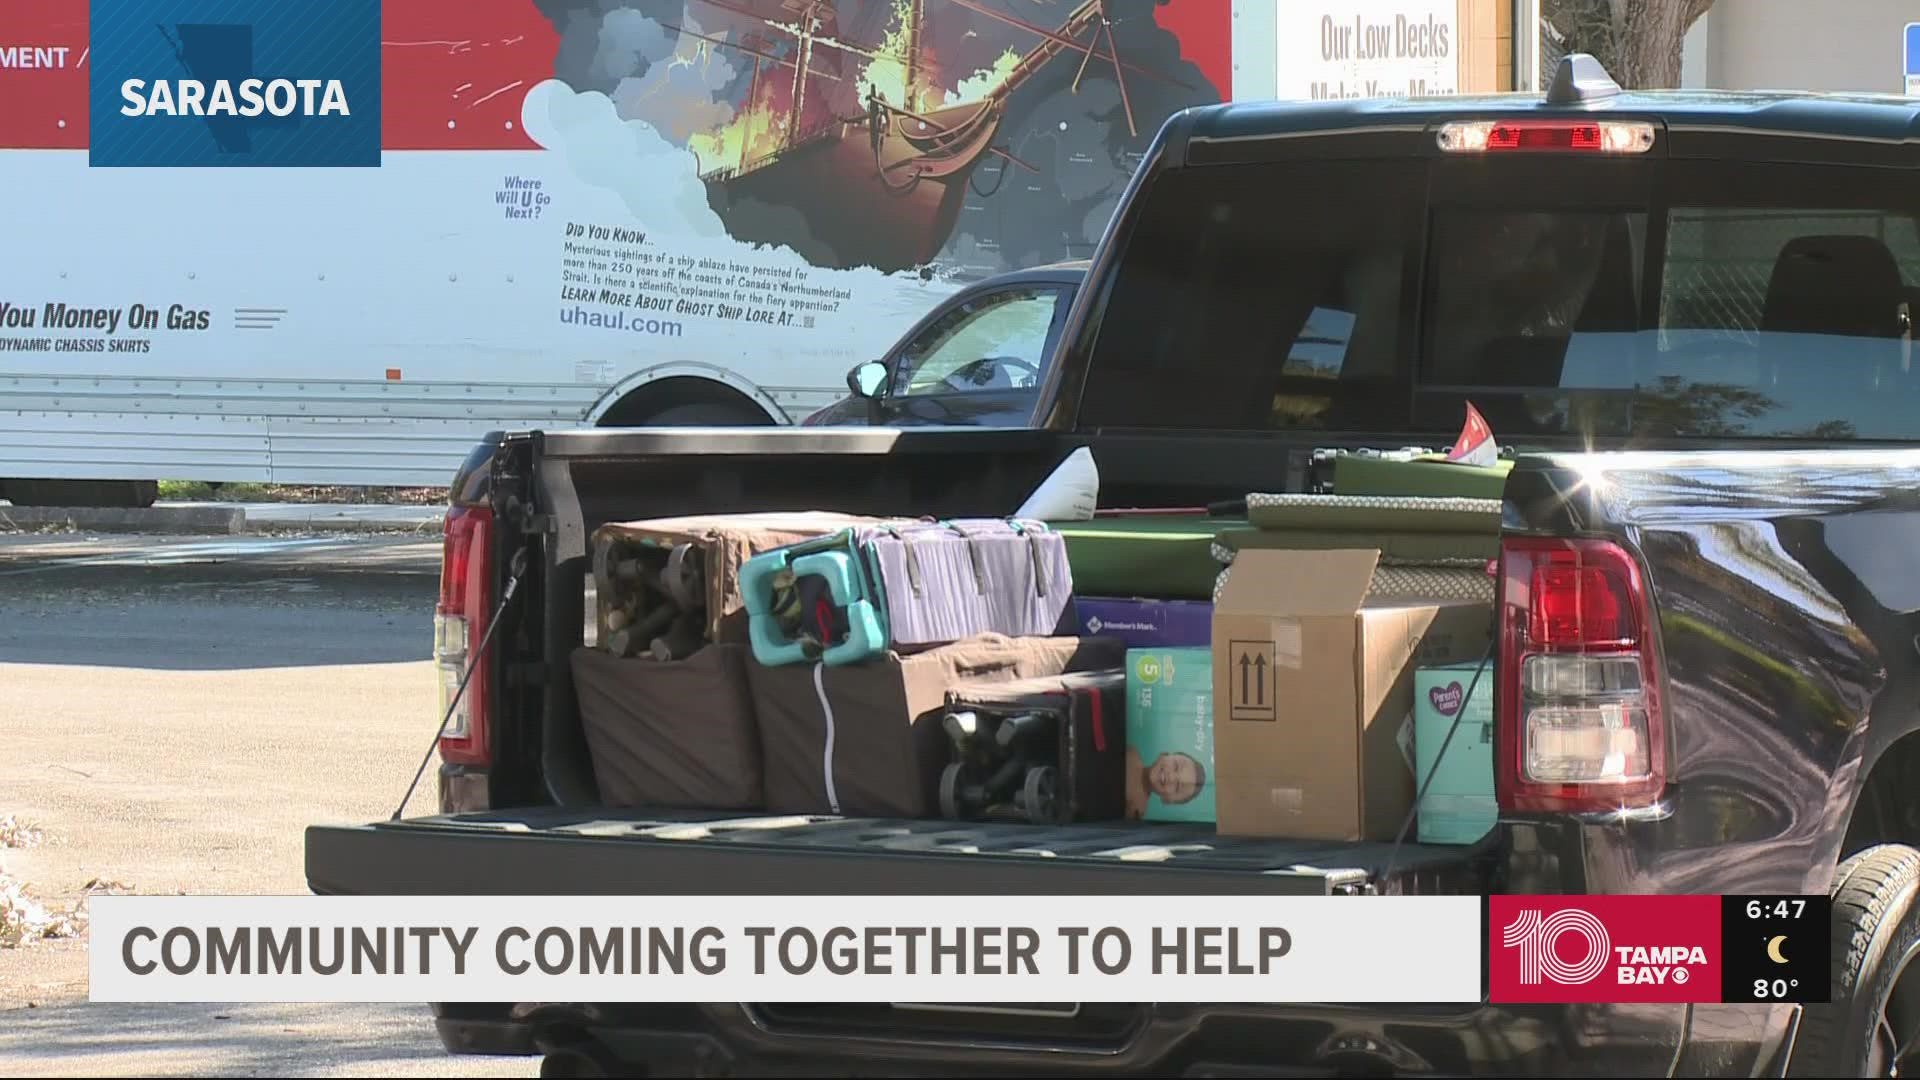 We spoke with Grace Community Church in Sarasota about how they're coming together to donate hundreds of much-needed supplies to those who were impacted by Ian.